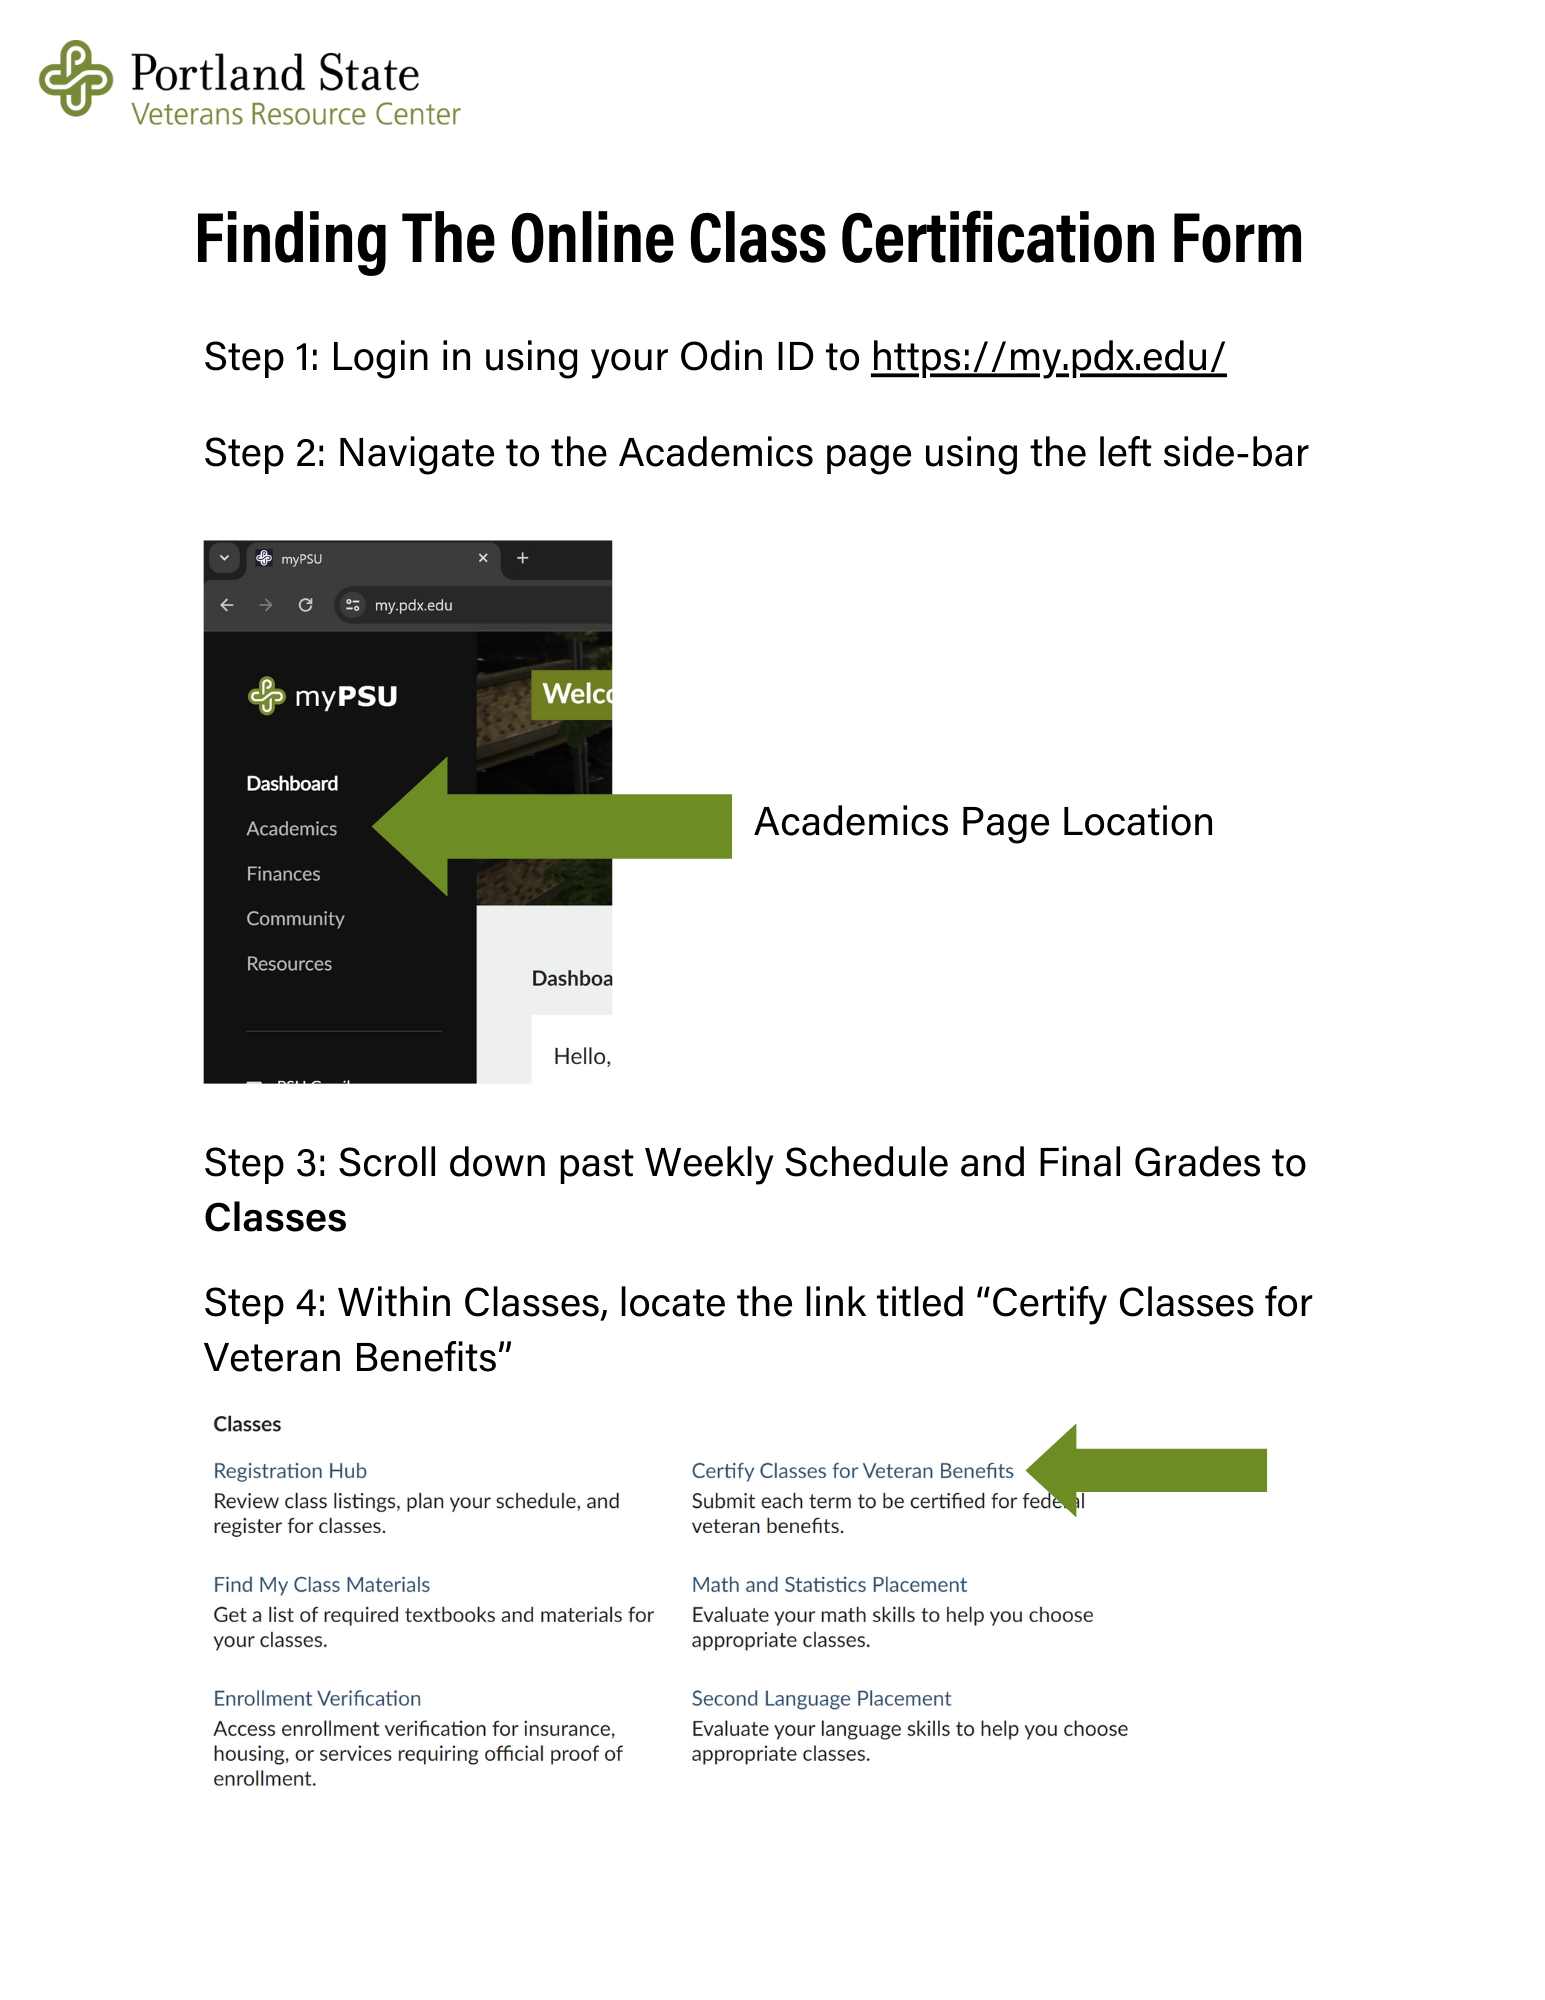 Finding the online class certification form